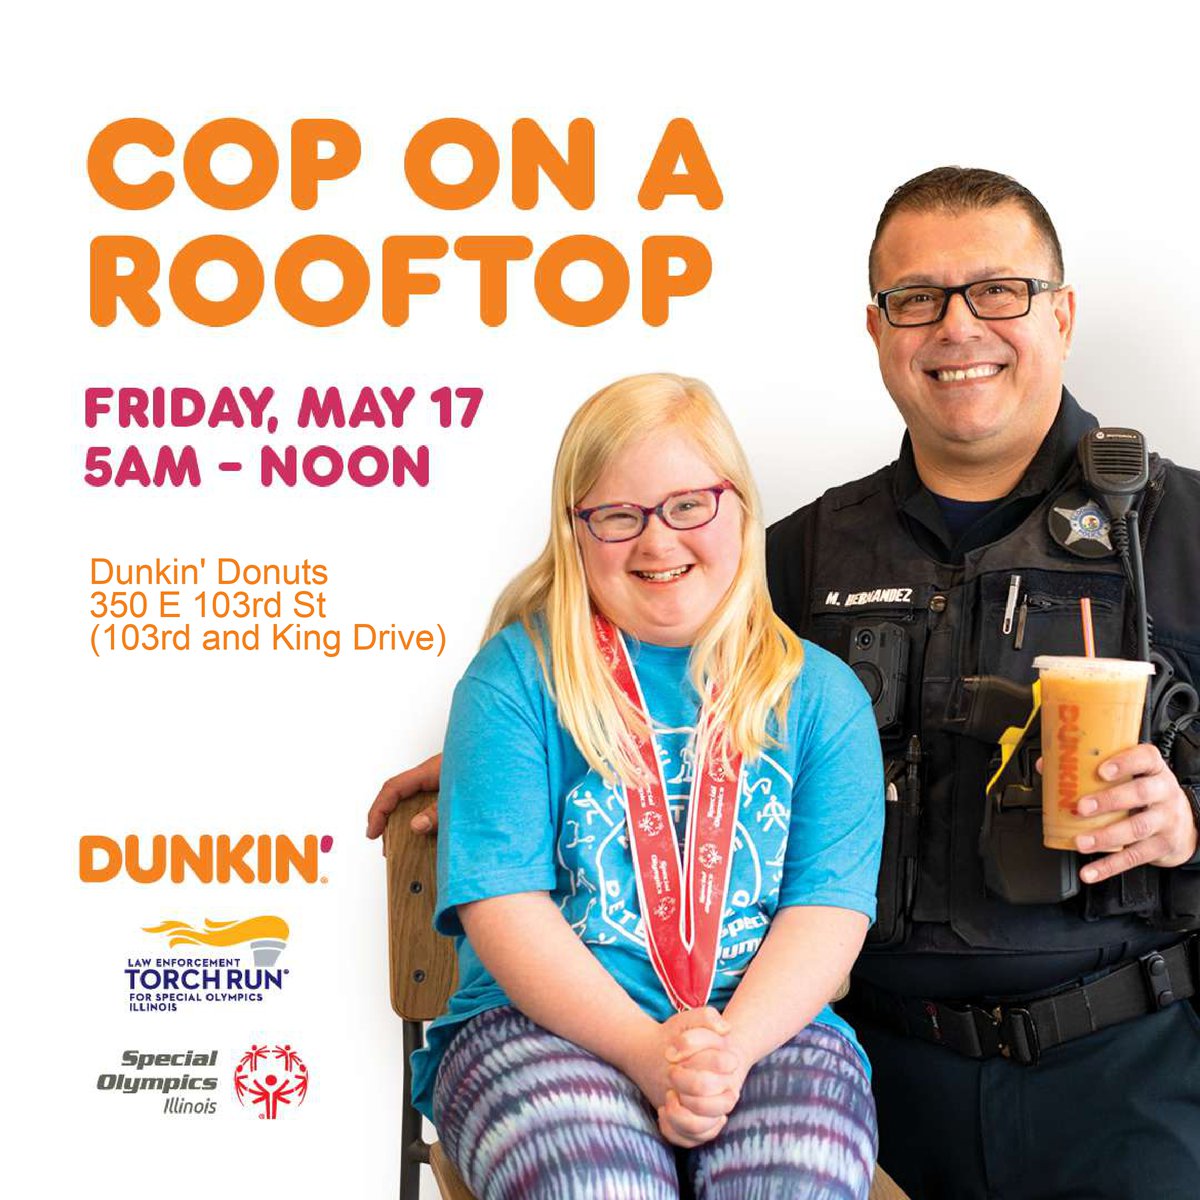 Join us on Friday, May 17th for Cop on a Rooftop at Dunkin Donuts, 350 E 103rd St, from 5 am to 12 pm. Donations will benefit Special Olympics Illinois